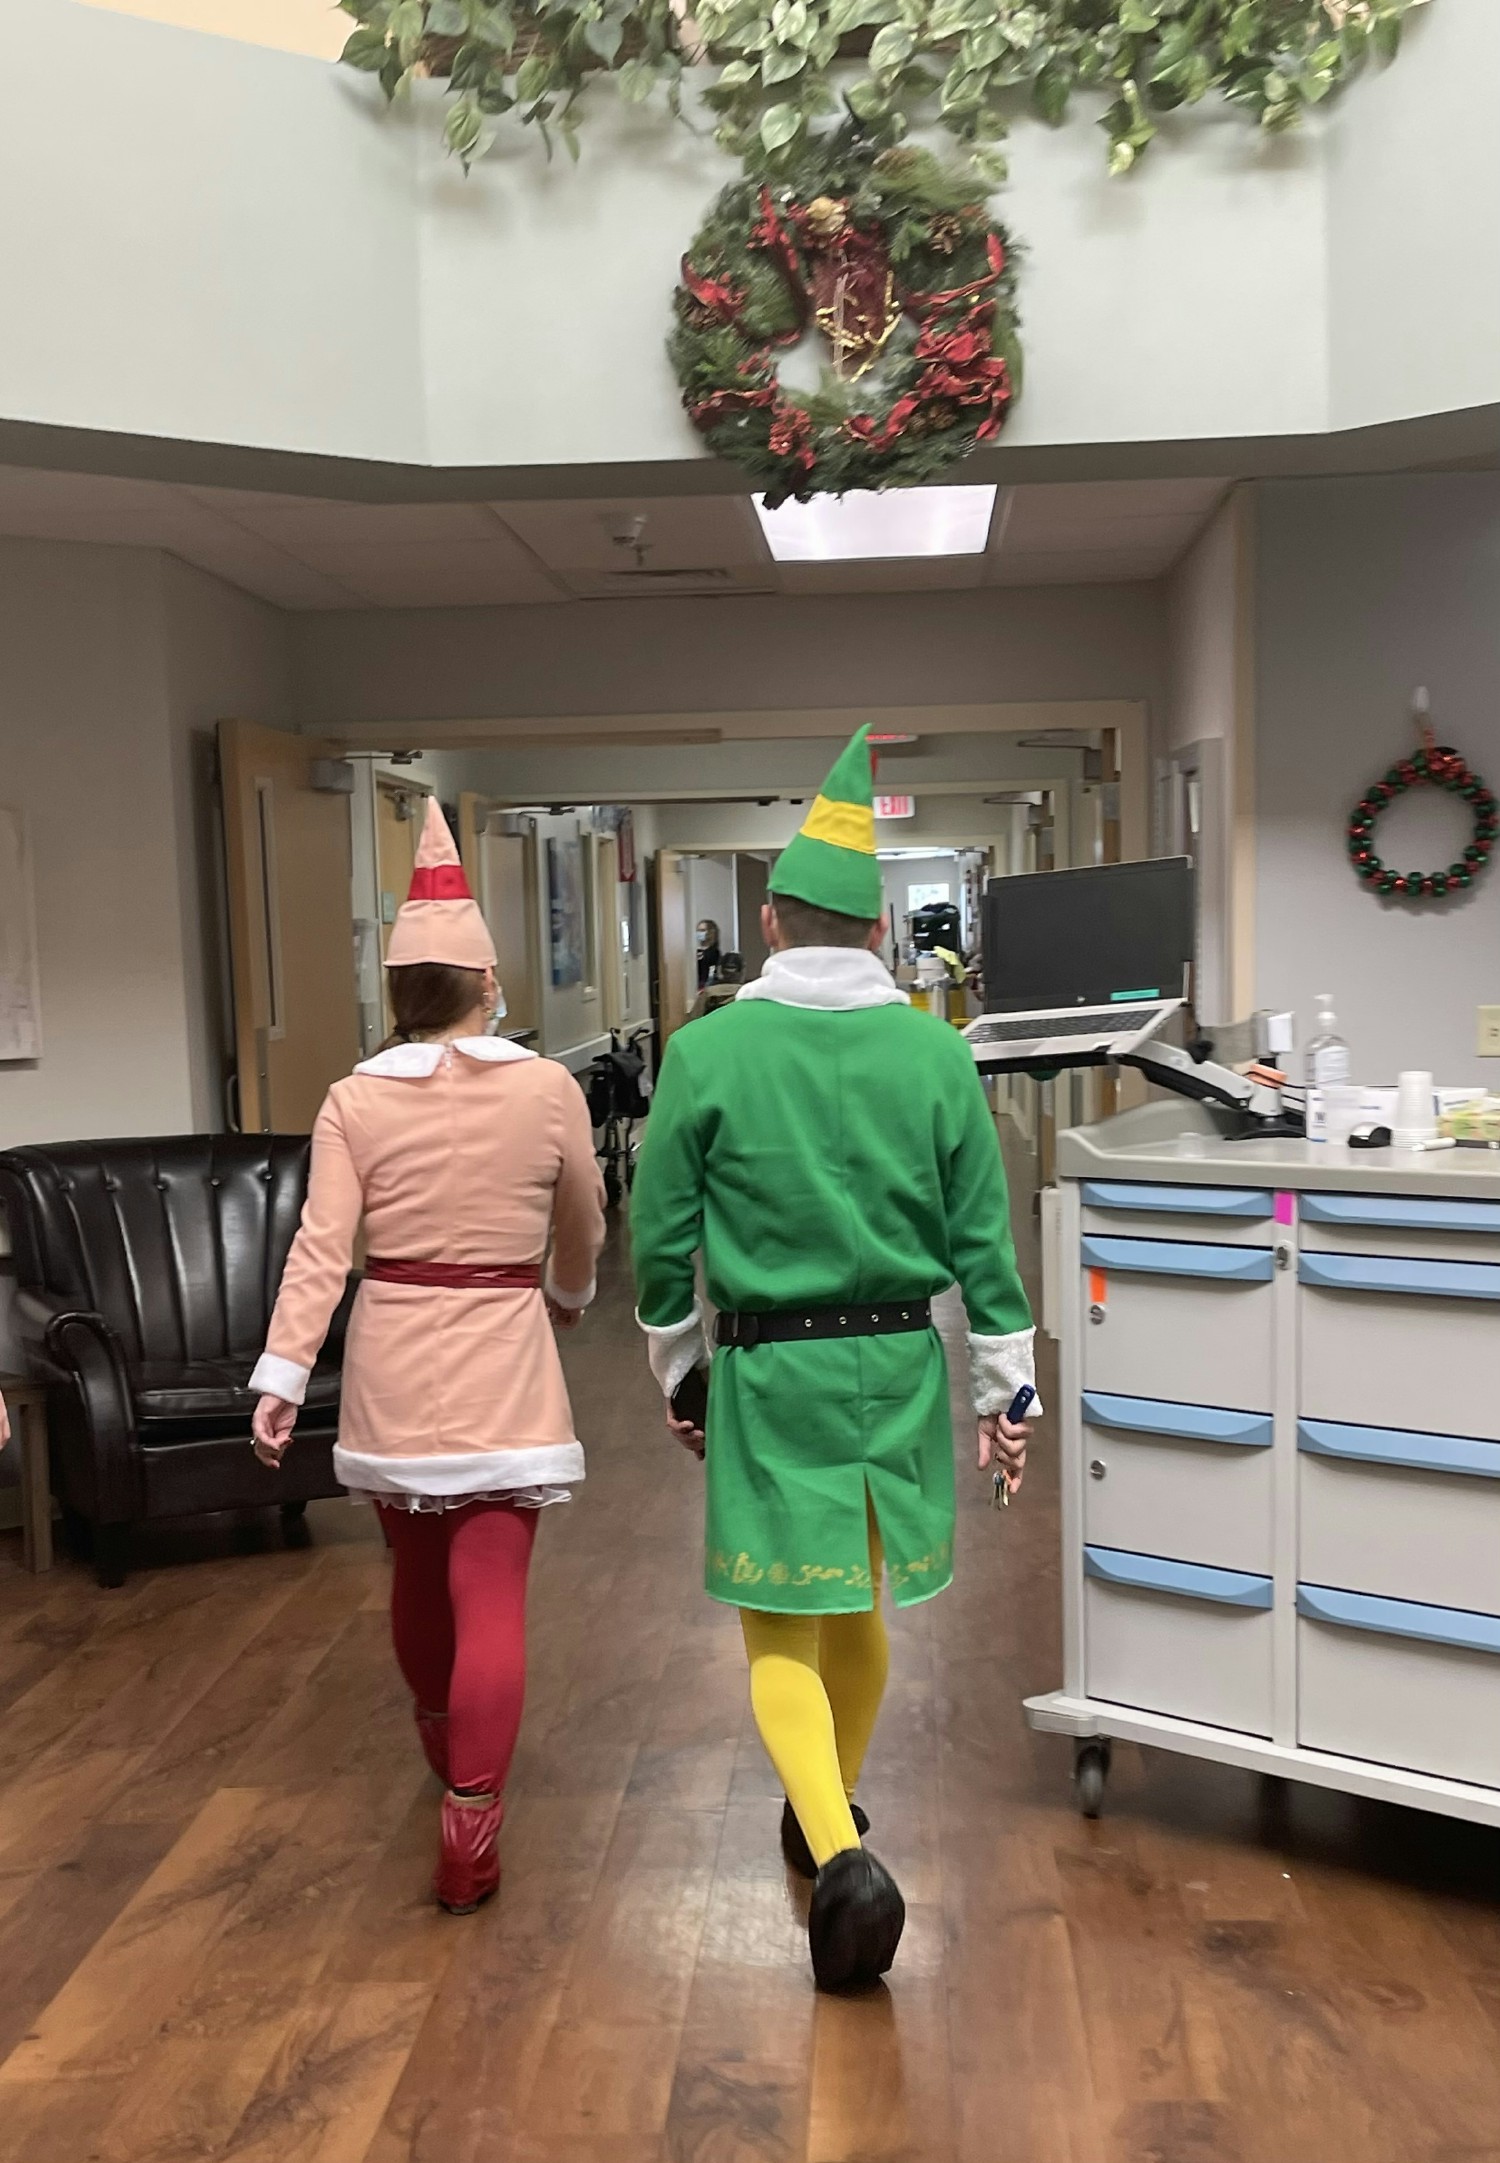 Caregivers spreading holiday cheer in one of our festive skilled nursing centers.